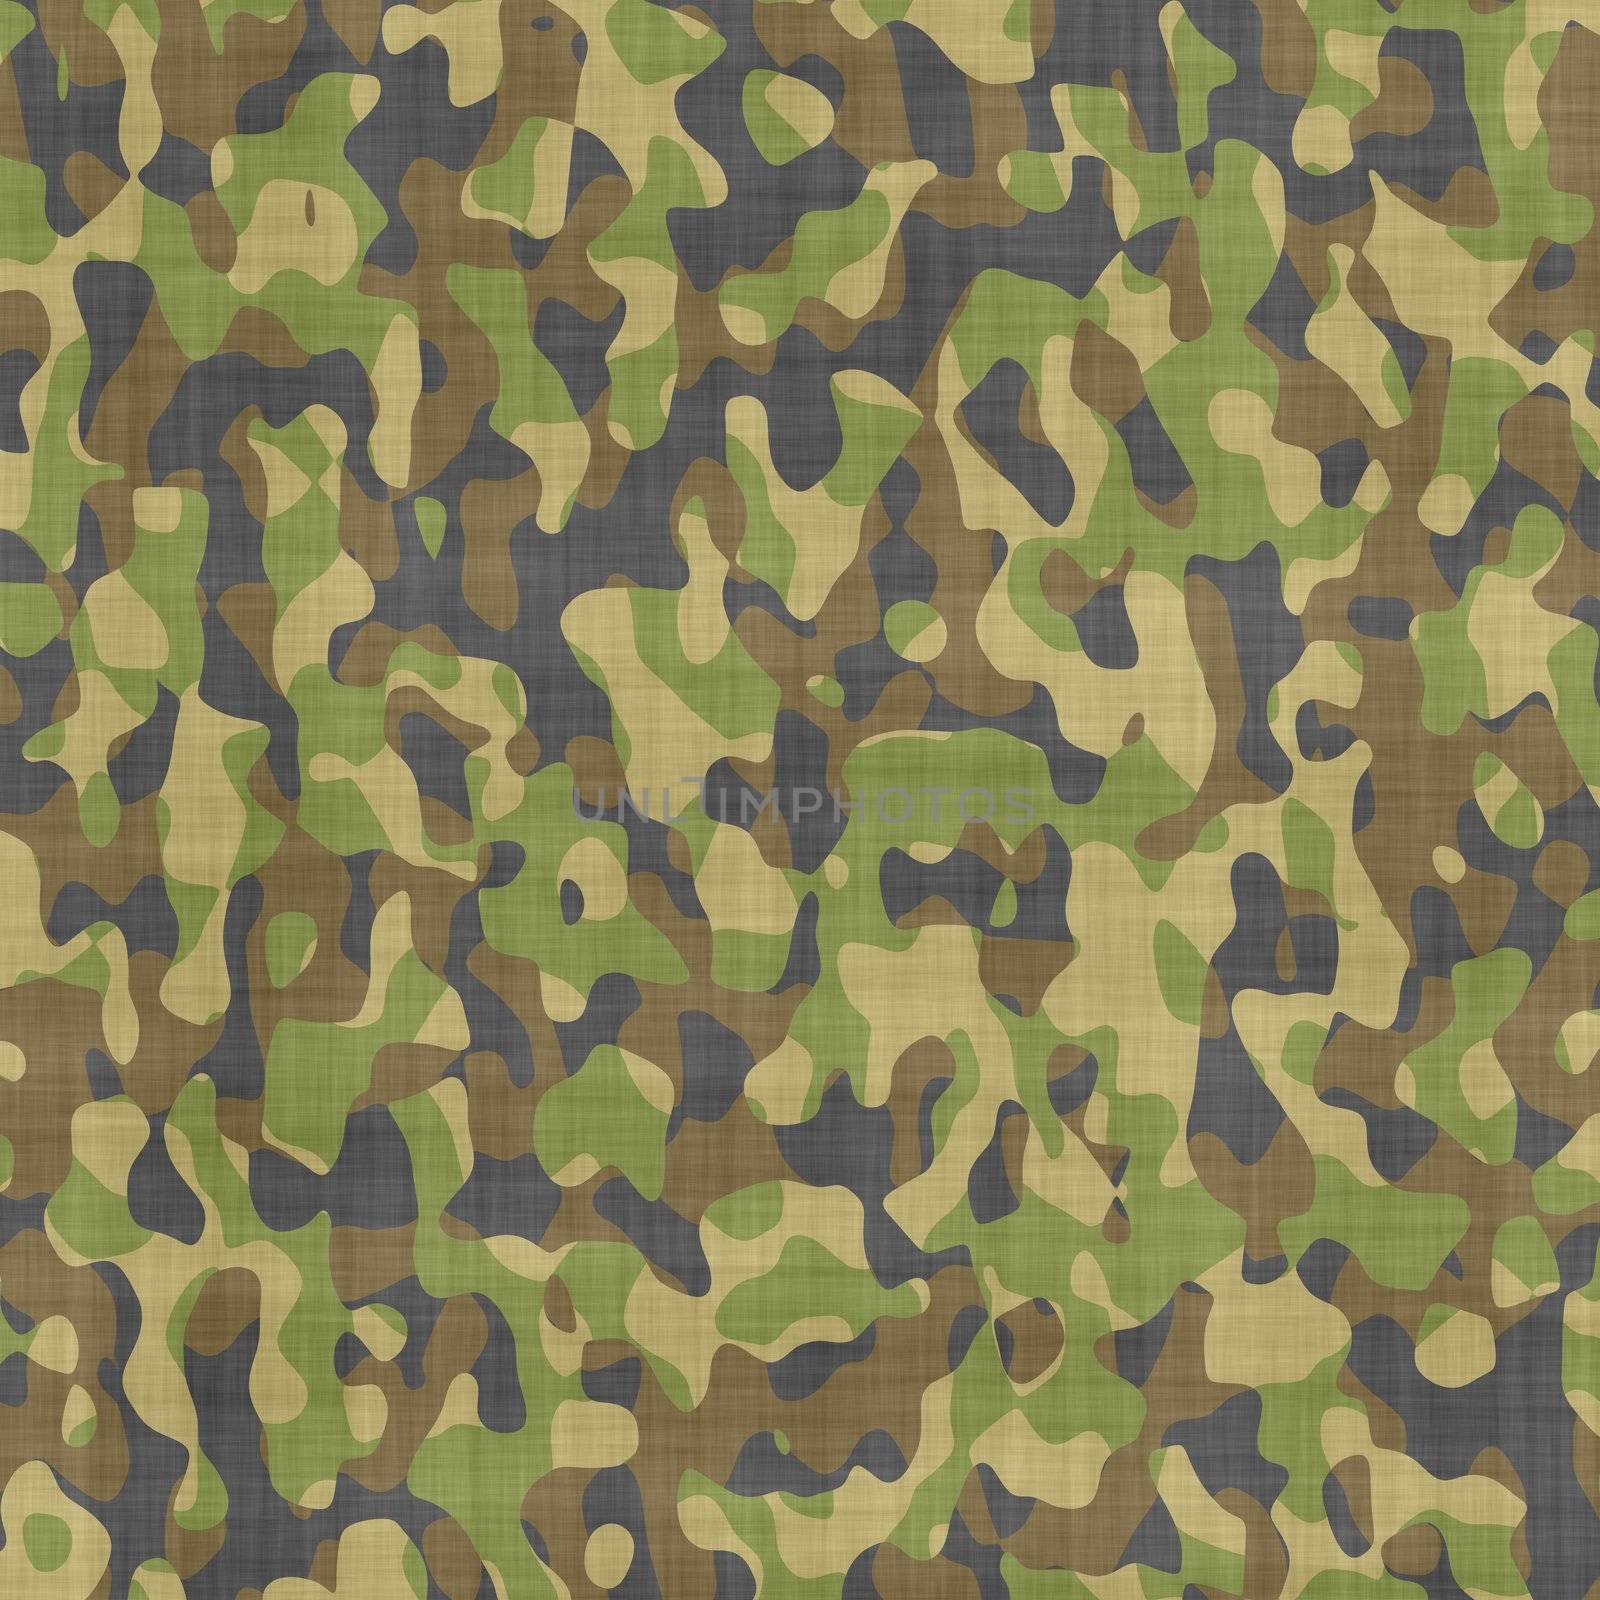 large background image of military camouflage material